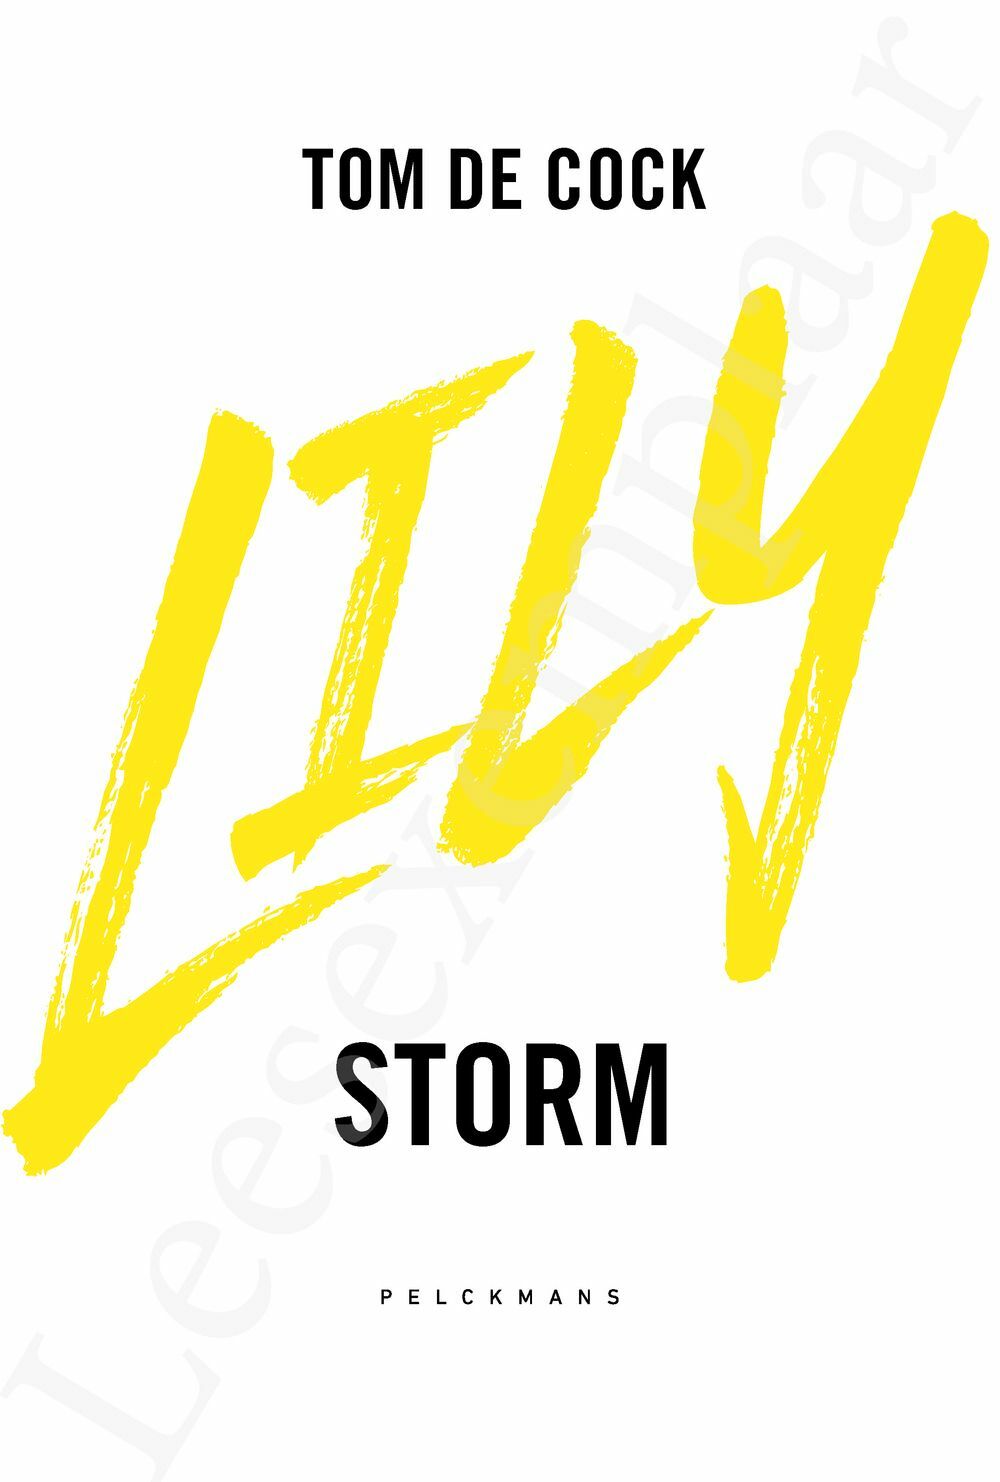 Preview: LILY: Storm